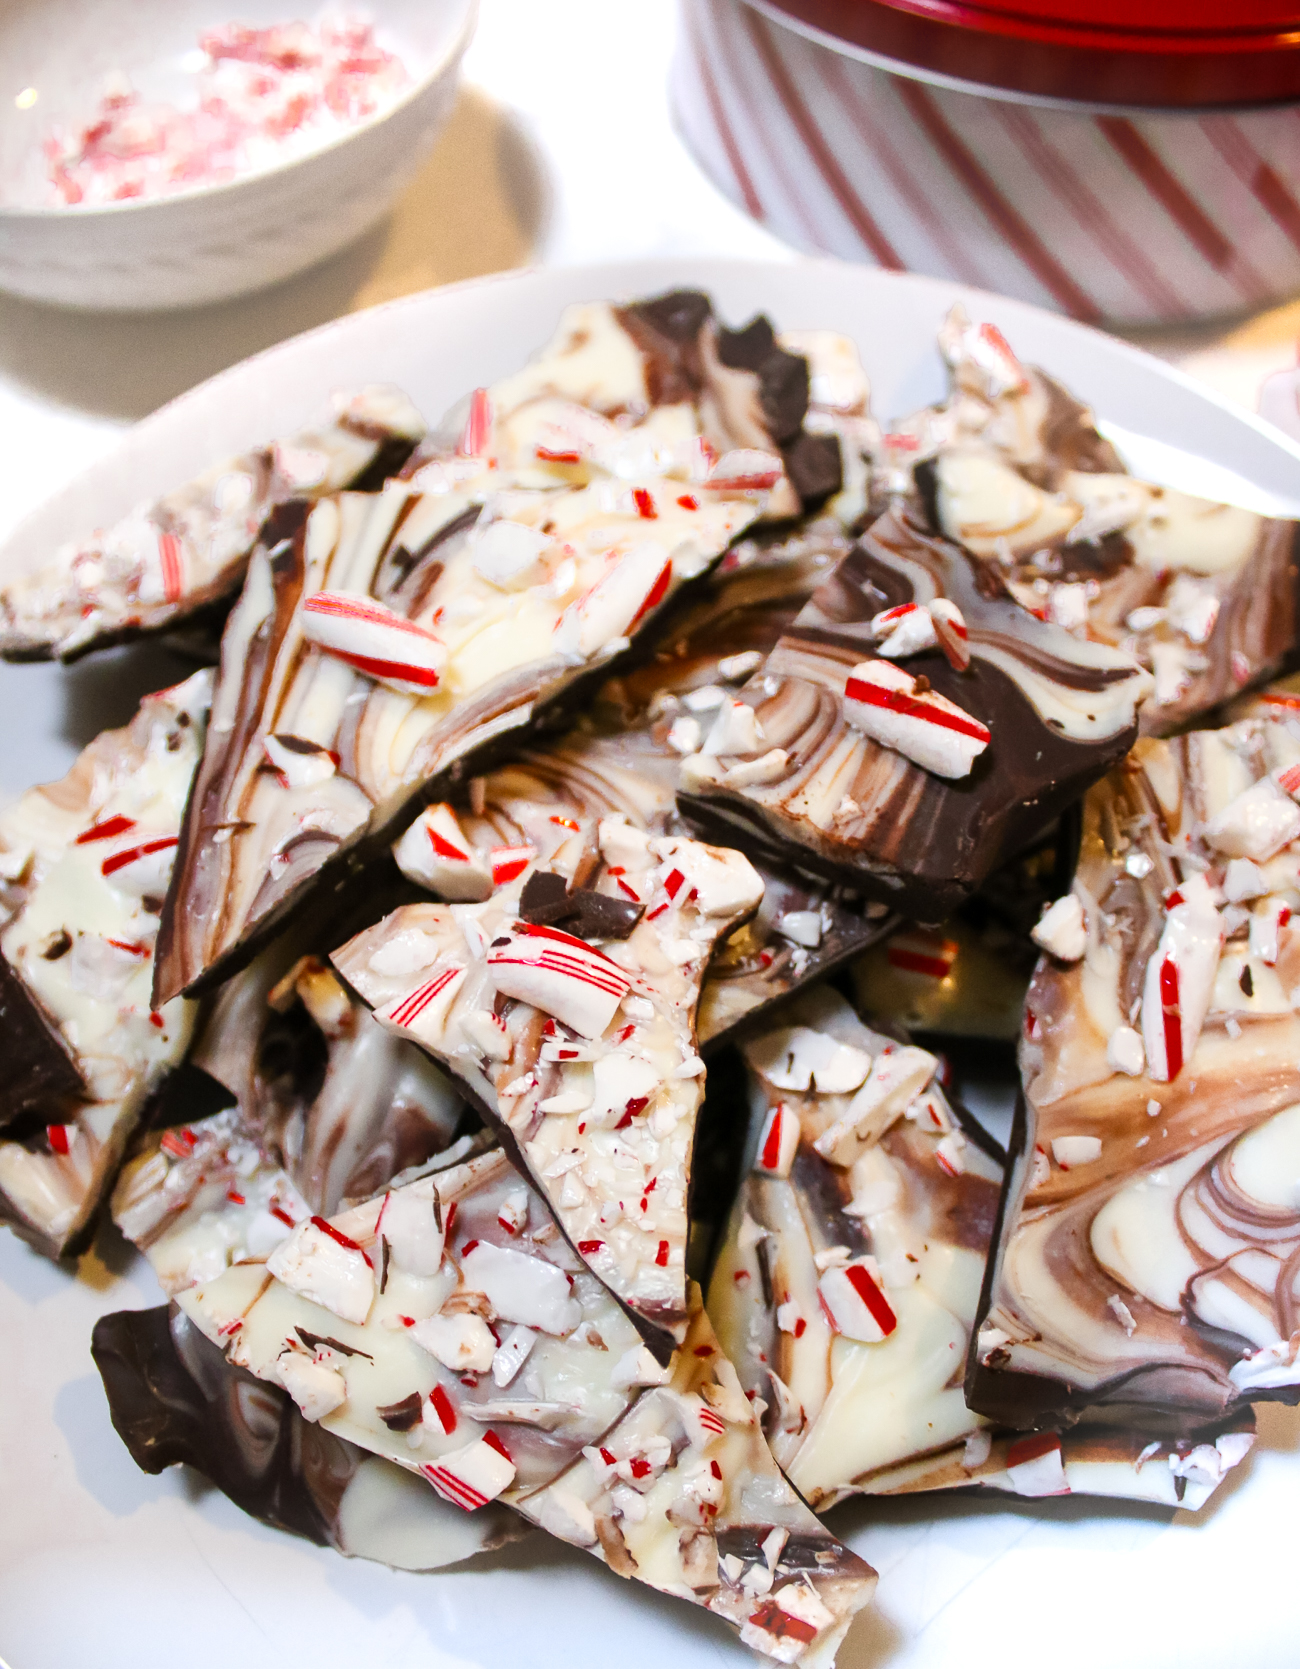 Homemade peppermint bark recipe adapted from Elisabet Der Nederlanden's "Holiday Cookies" that tastes exactly like the famous William Sonoma Peppermint Bark by southern blogger Stephanie Ziajka from Diary of a Debutante